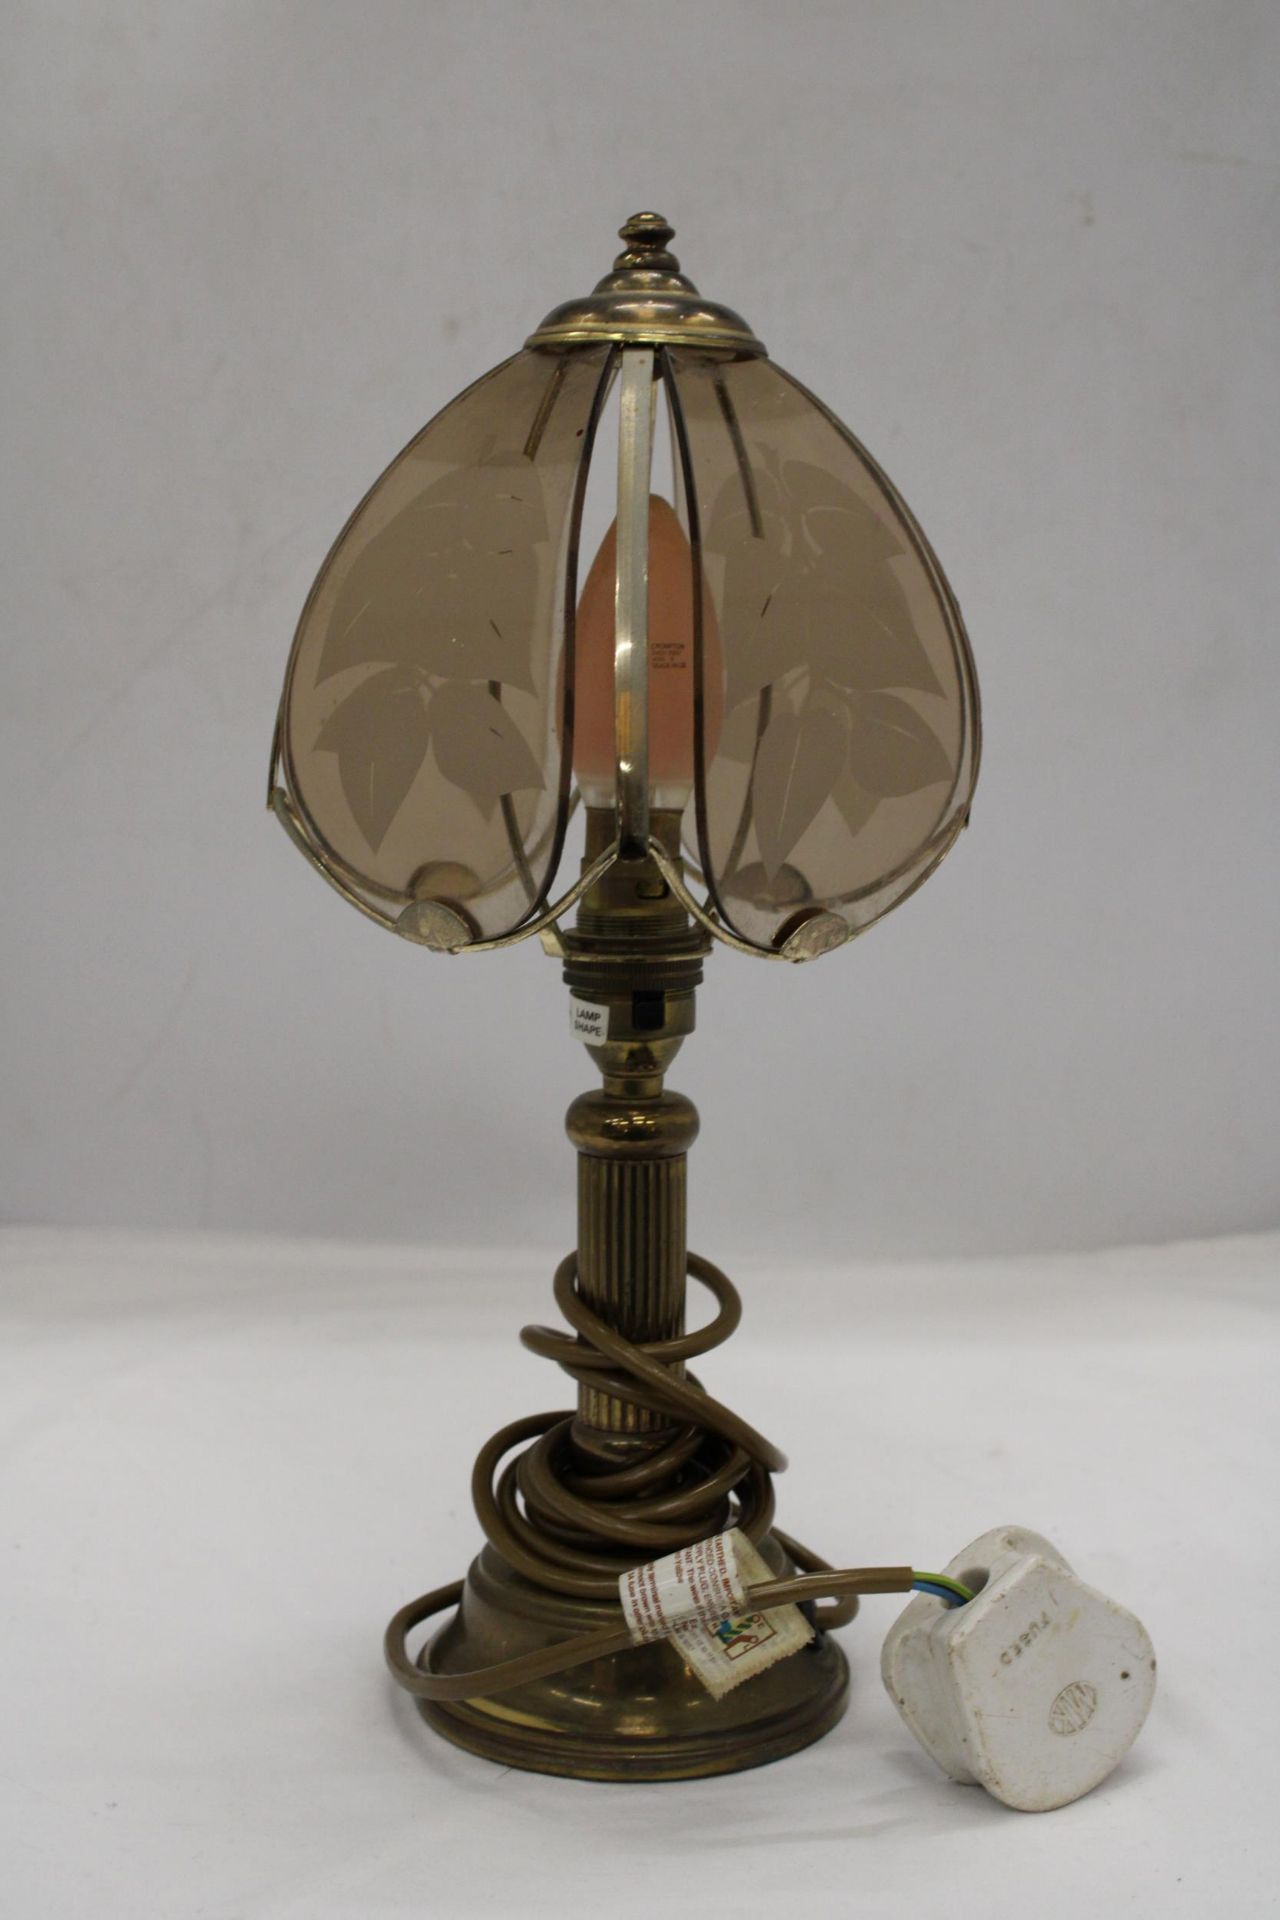 A VINTAGE STYLE, BRASS TABLE LAMP, WITH COLUMN BASE AND A GLASS SHADE, HEIGHT 36CM - Image 2 of 5